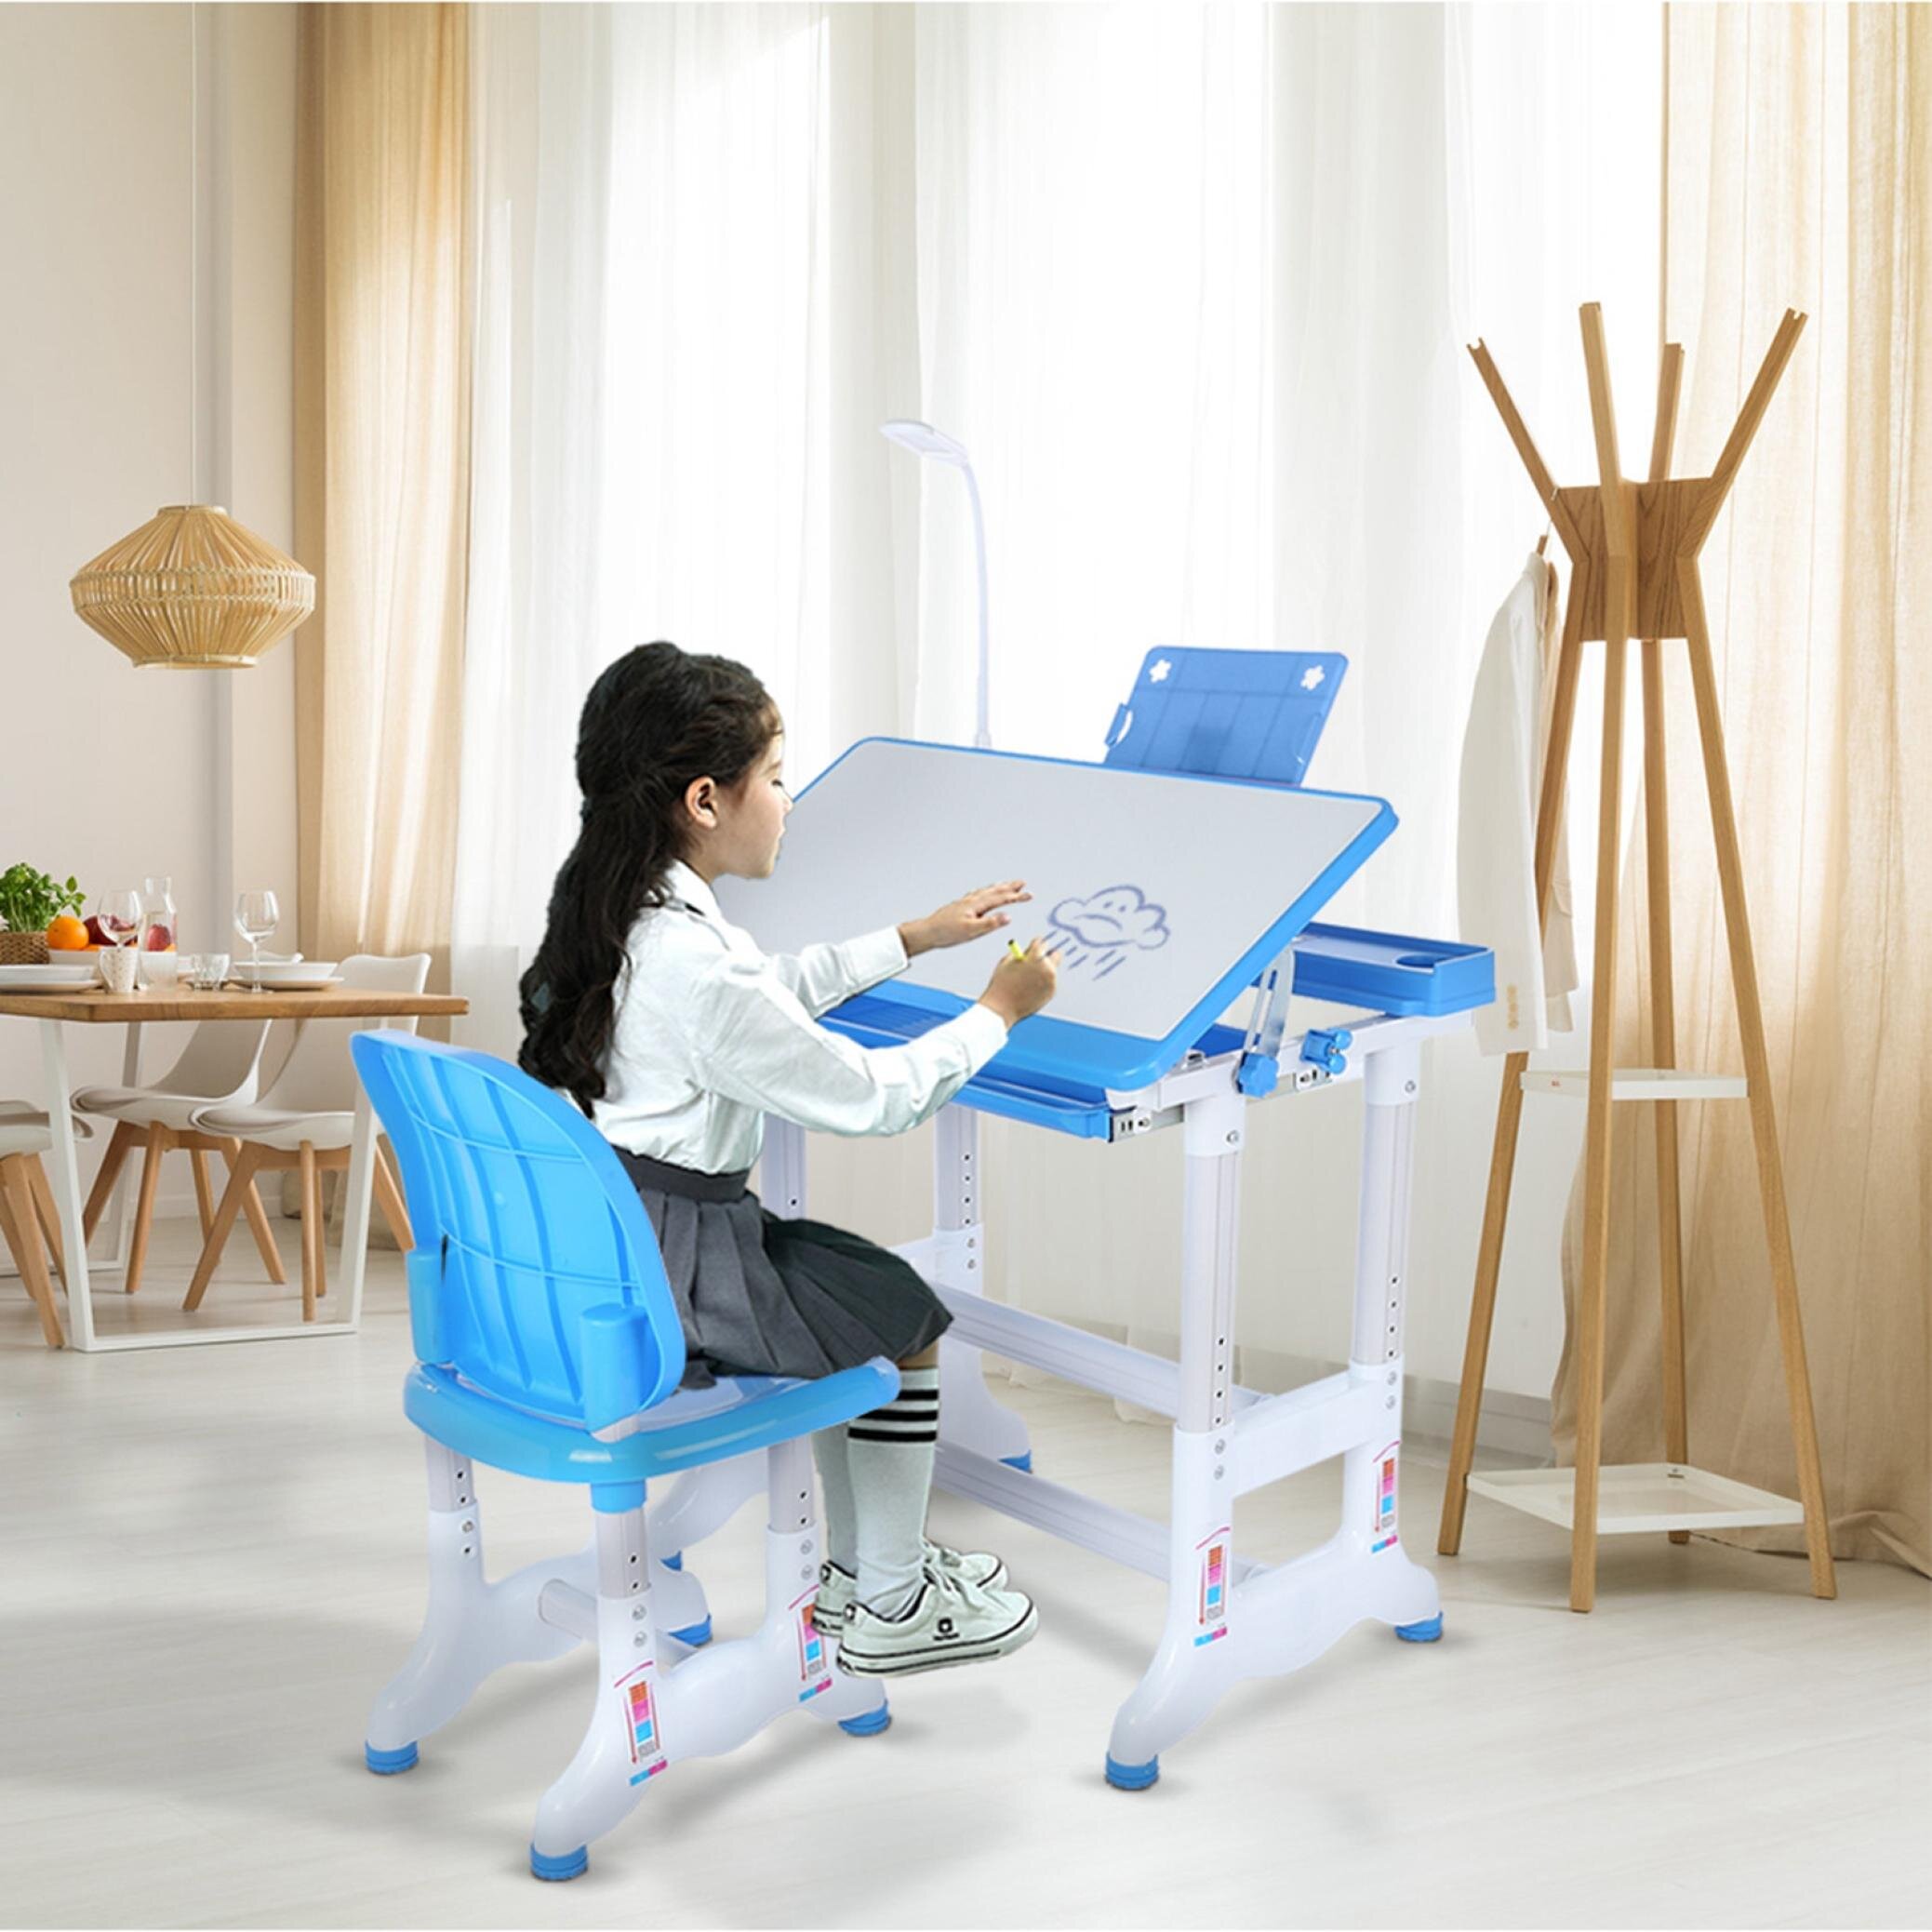 TOPMU Children Desk with LED Light Blue Height Adjustable Kids Study Table and Chair Set Childs Desk w/Lamp School Student Writing Desk w/Pull Out Drawer Storage,Pencil Case,Bookstand 